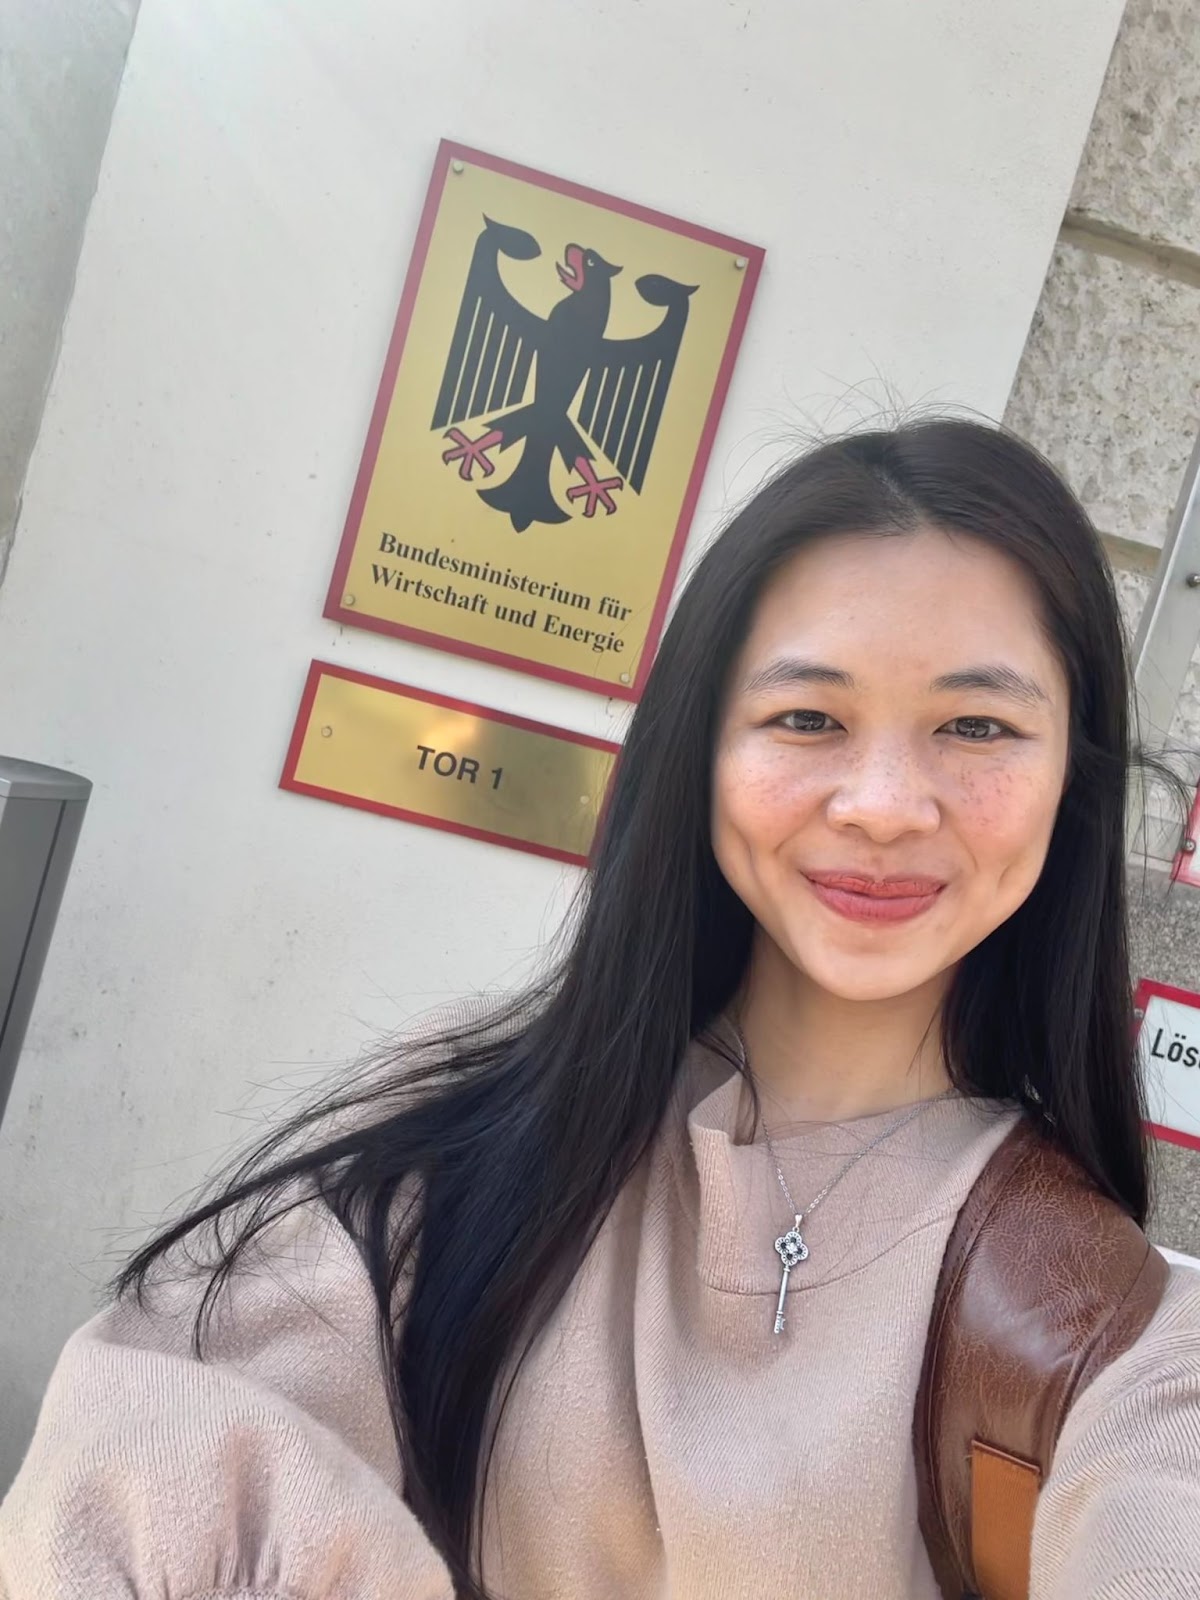 Caption: Cinny at the German Federal Ministry for Economic Affairs